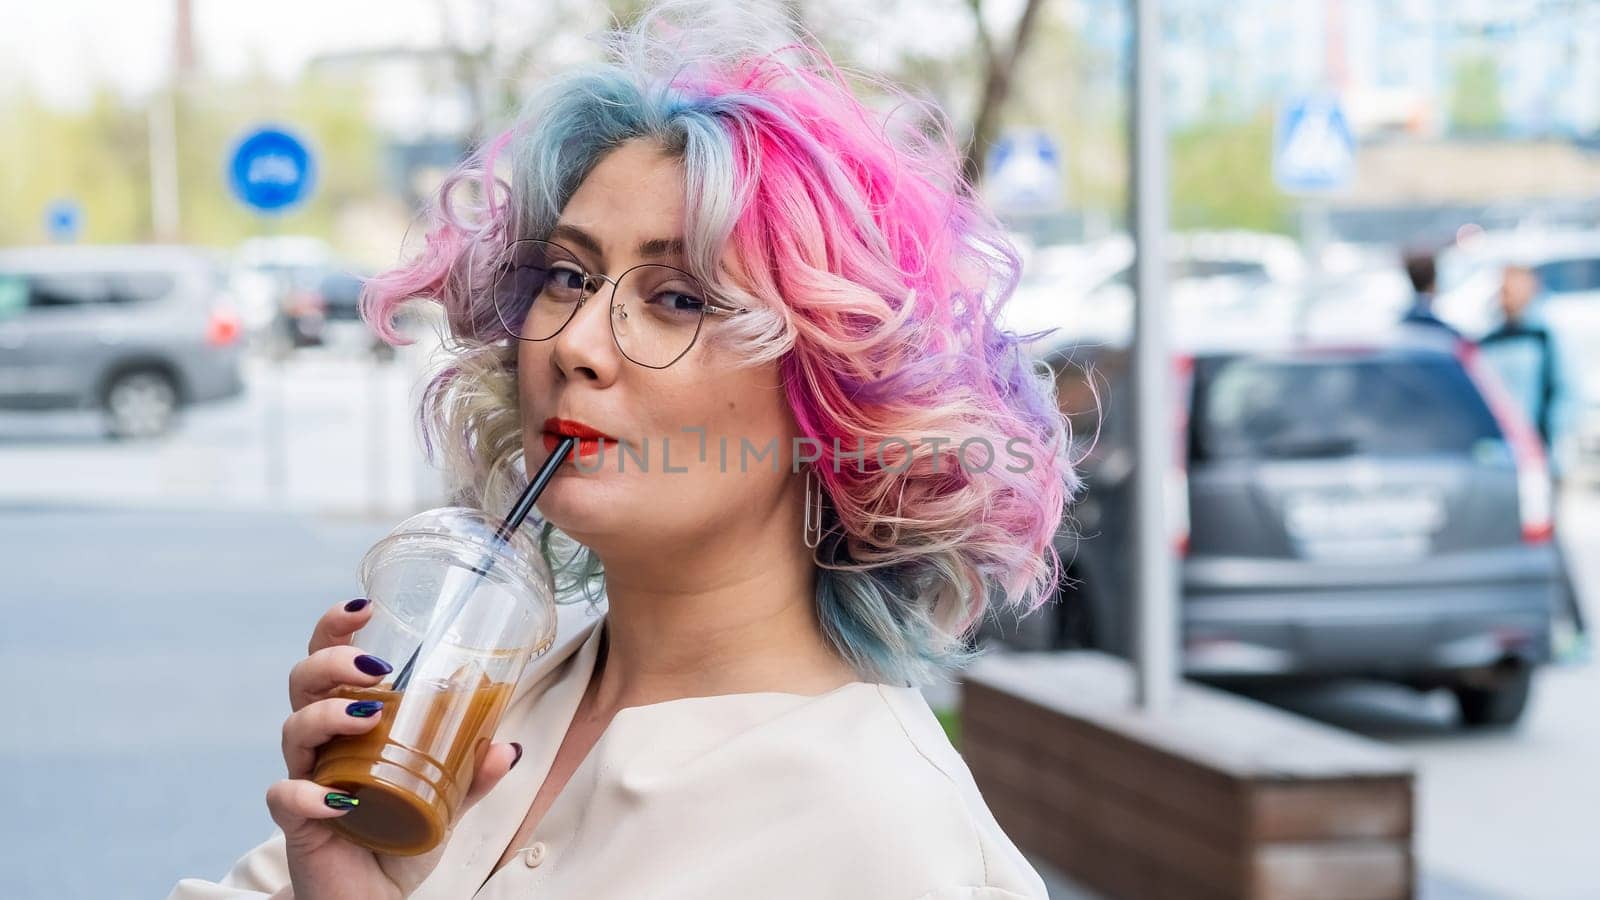 Close-up portrait of curly Caucasian woman with multi-colored hair wearing glasses. The hairstyle model is drinking a cold drink. by mrwed54